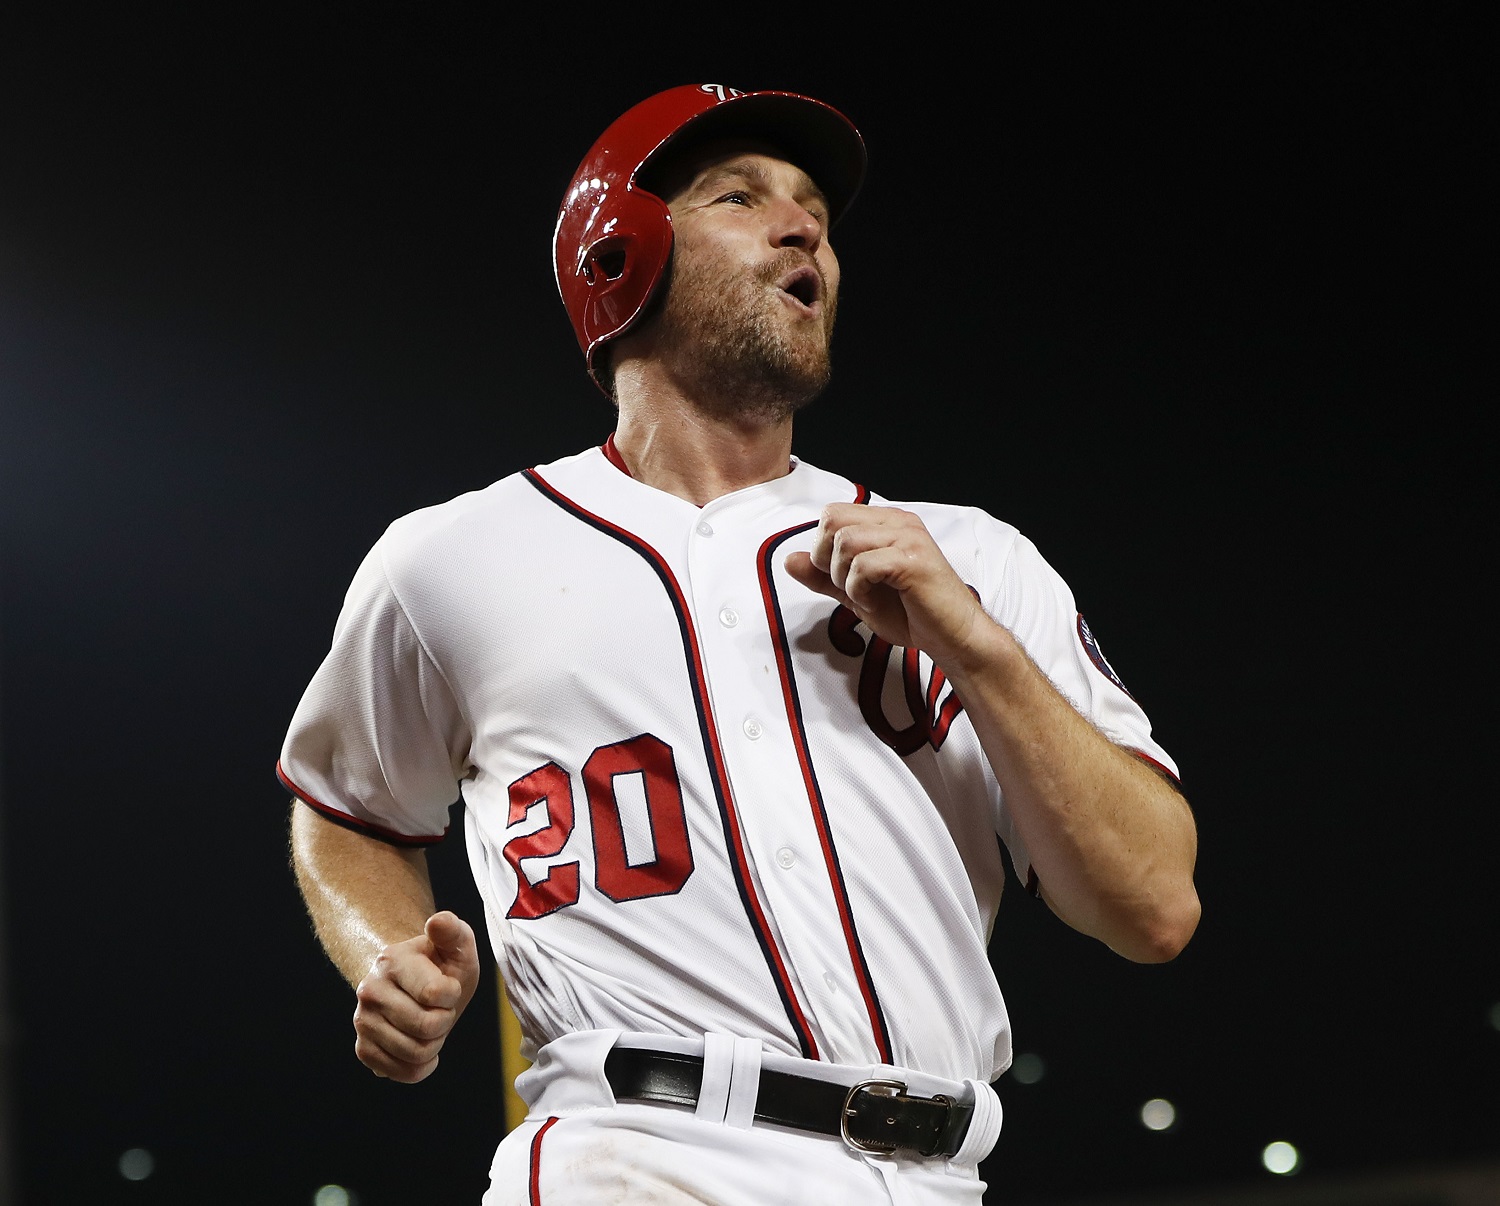 Washington Nationals' Daniel Murphy celebrates as he crosses home while scoring on a triple hit by teammate Bryce Harper during a baseball game against the Colorado Rockies at Nationals Park, Friday, Aug. 26, 2016 in Washington. (AP Photo/Pablo Martinez Monsivais)